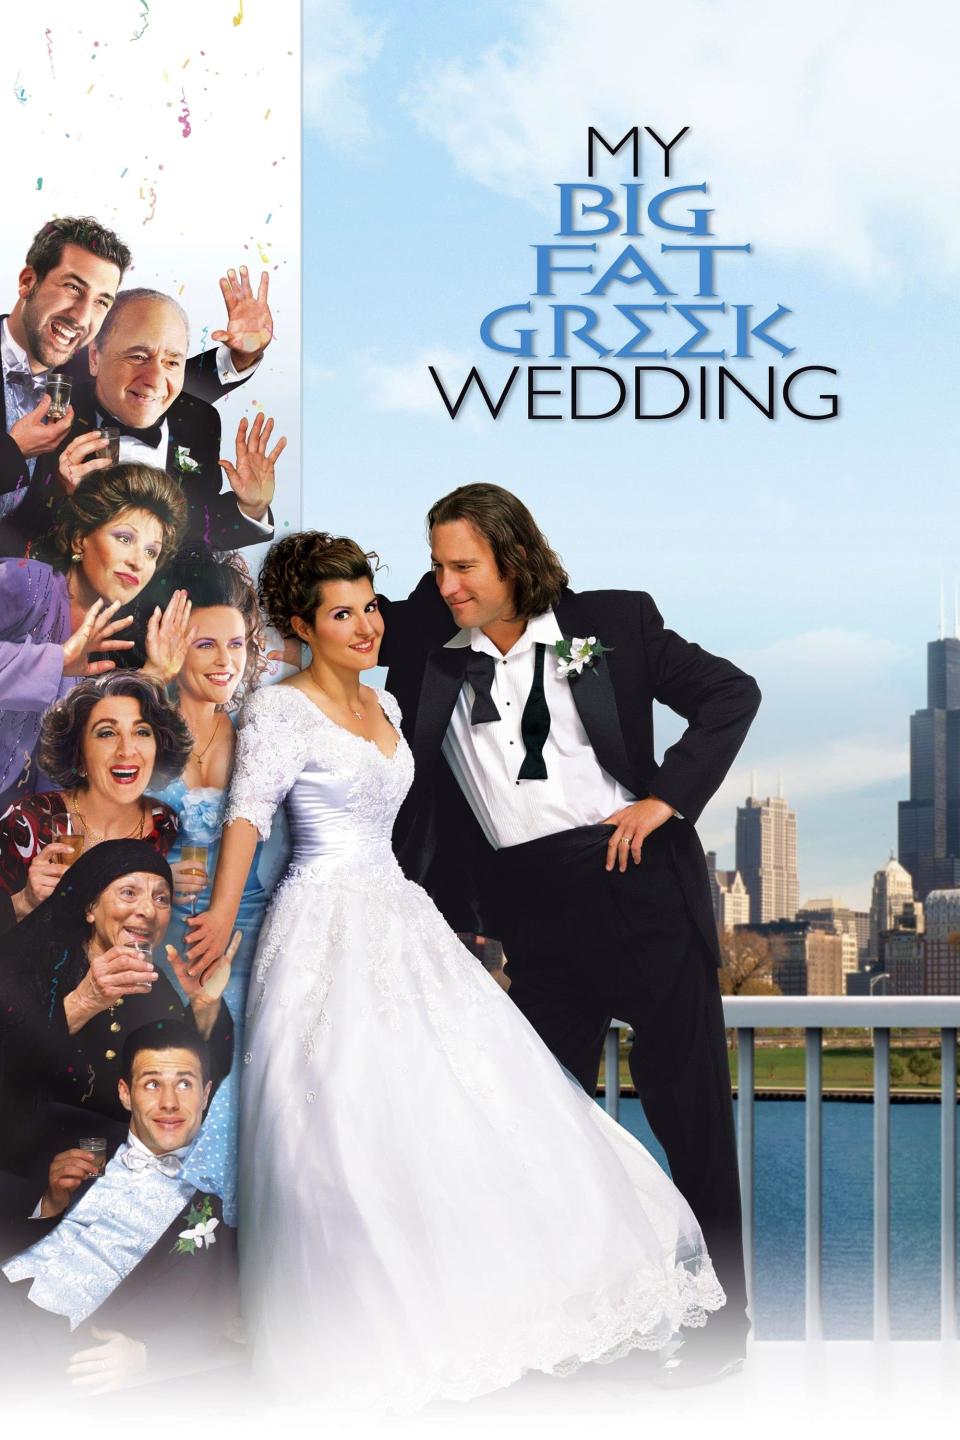 The poster for "My Big Fat Greek Wedding."